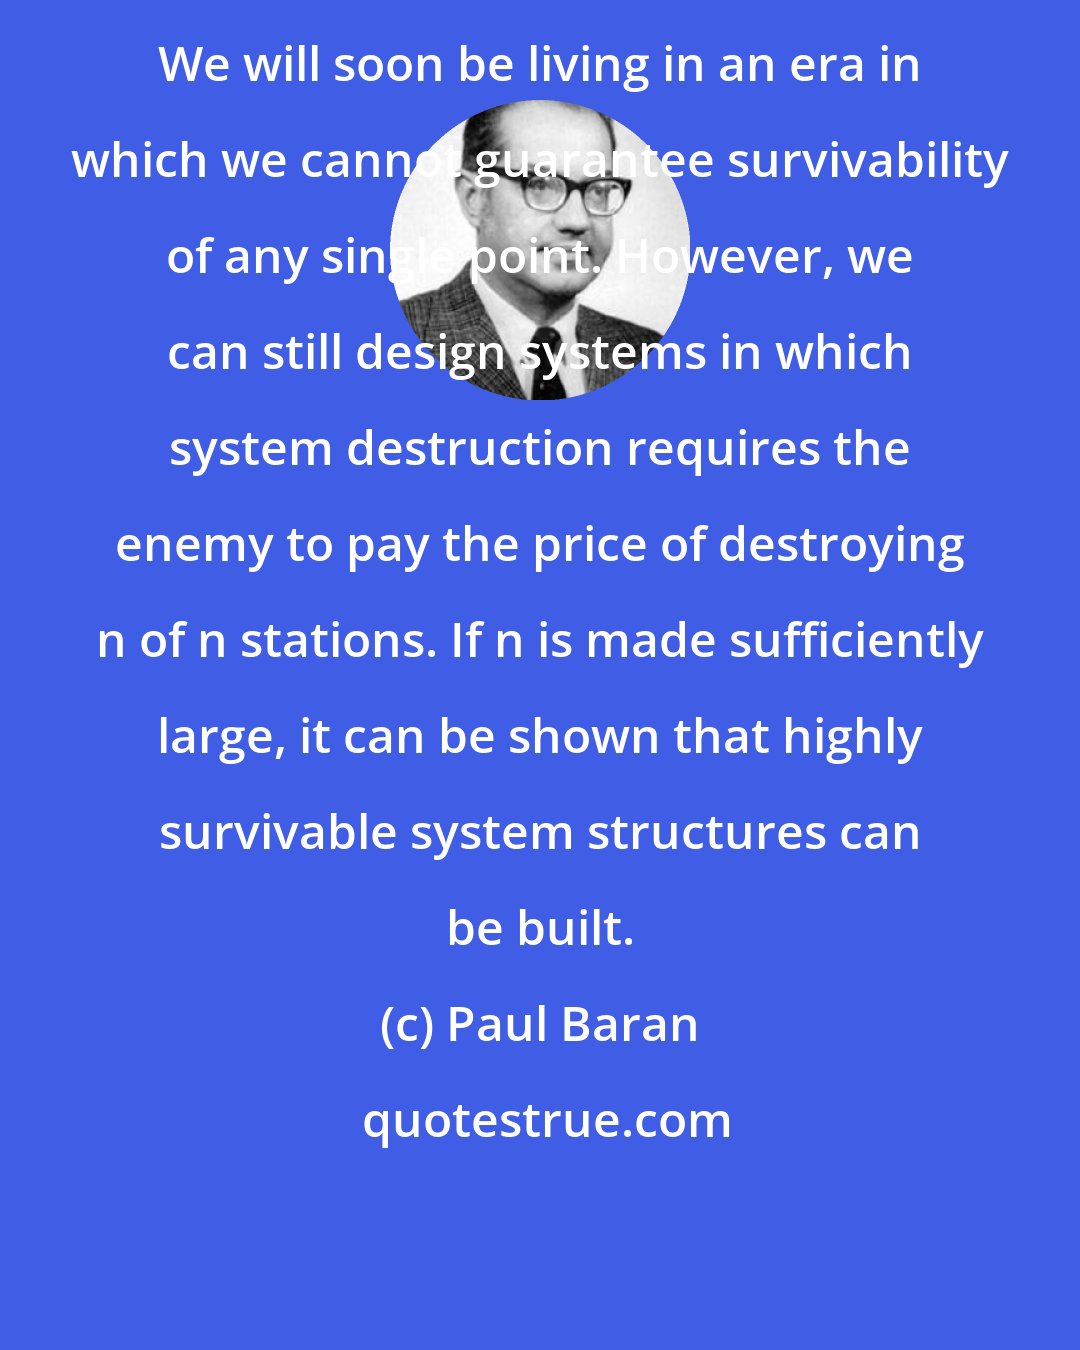 Paul Baran: We will soon be living in an era in which we cannot guarantee survivability of any single point. However, we can still design systems in which system destruction requires the enemy to pay the price of destroying n of n stations. If n is made sufficiently large, it can be shown that highly survivable system structures can be built.